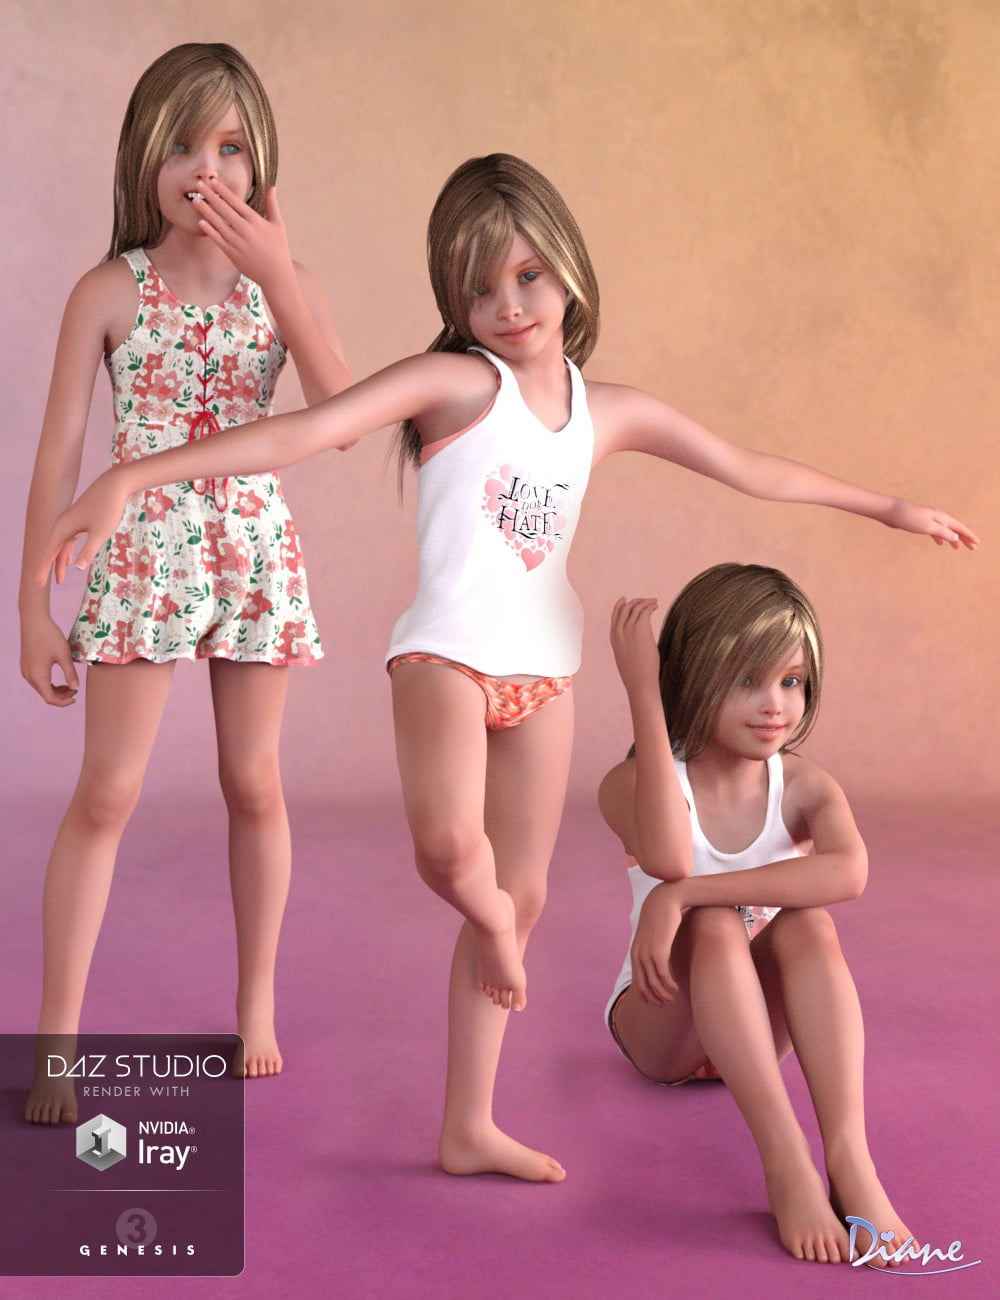 Adorbs Poses For Skyler And Genesis Female S D Models For Daz